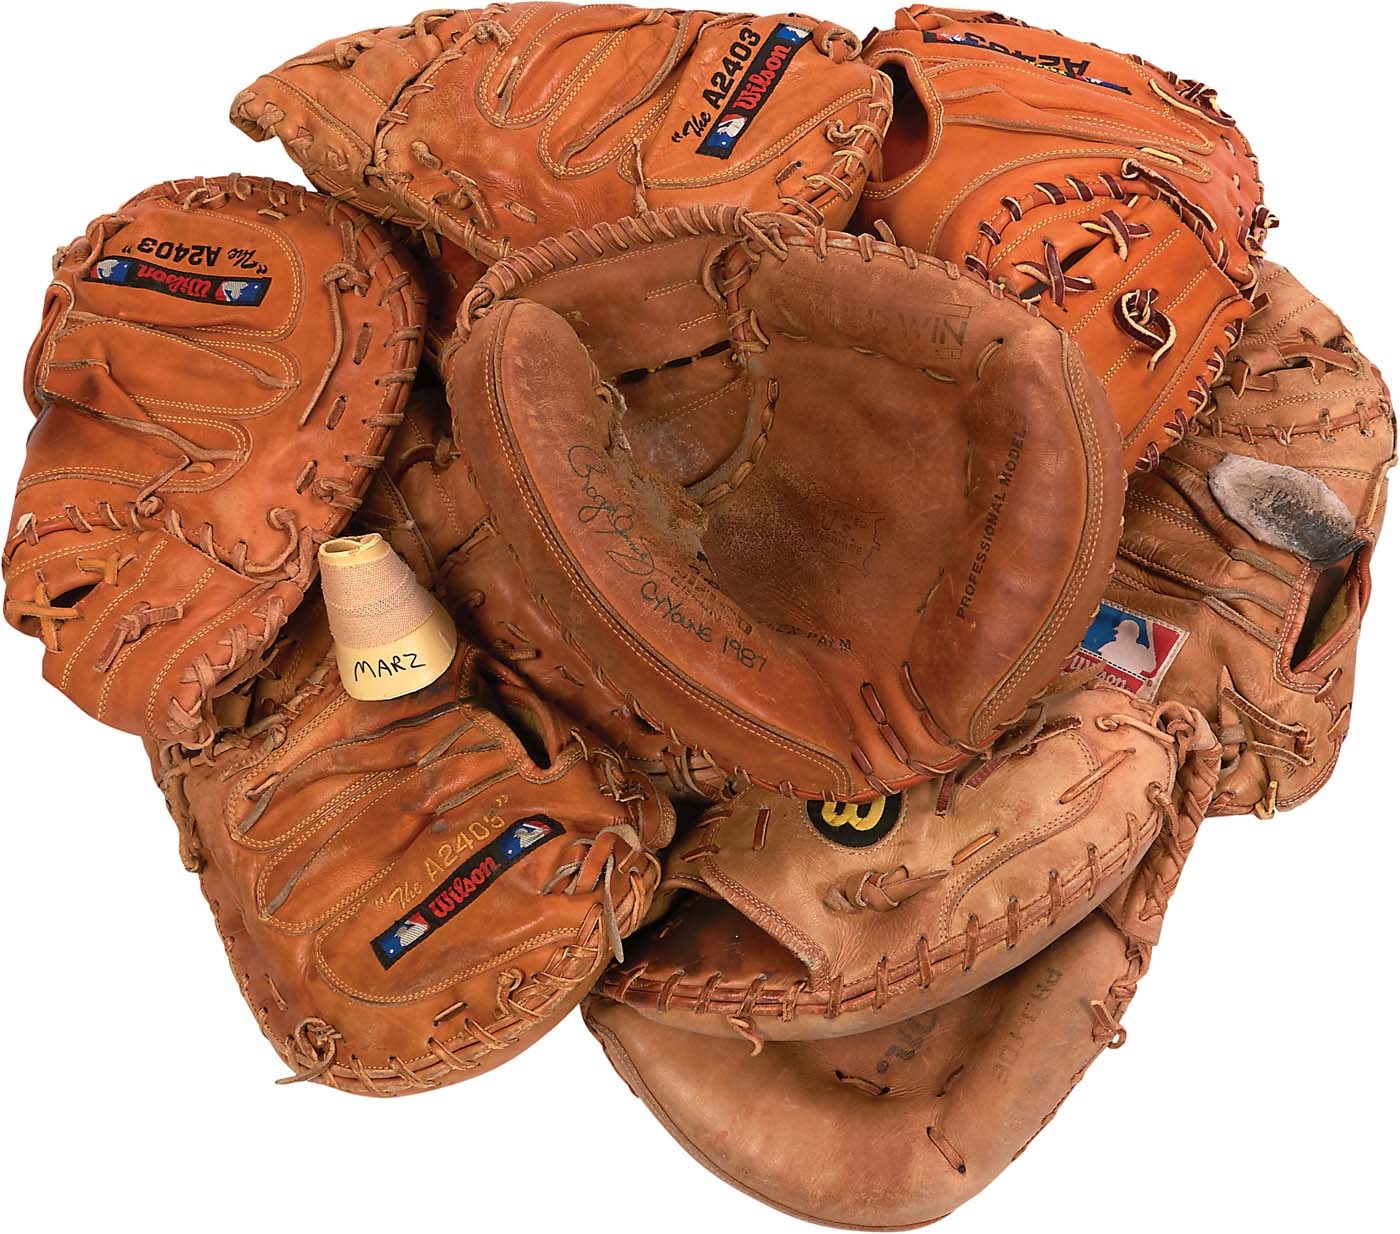 - John Marzano Game Worn Catcher's Mitt Collection w/One "Destroyed" by Roger Clemens (Some Photo-Matched)